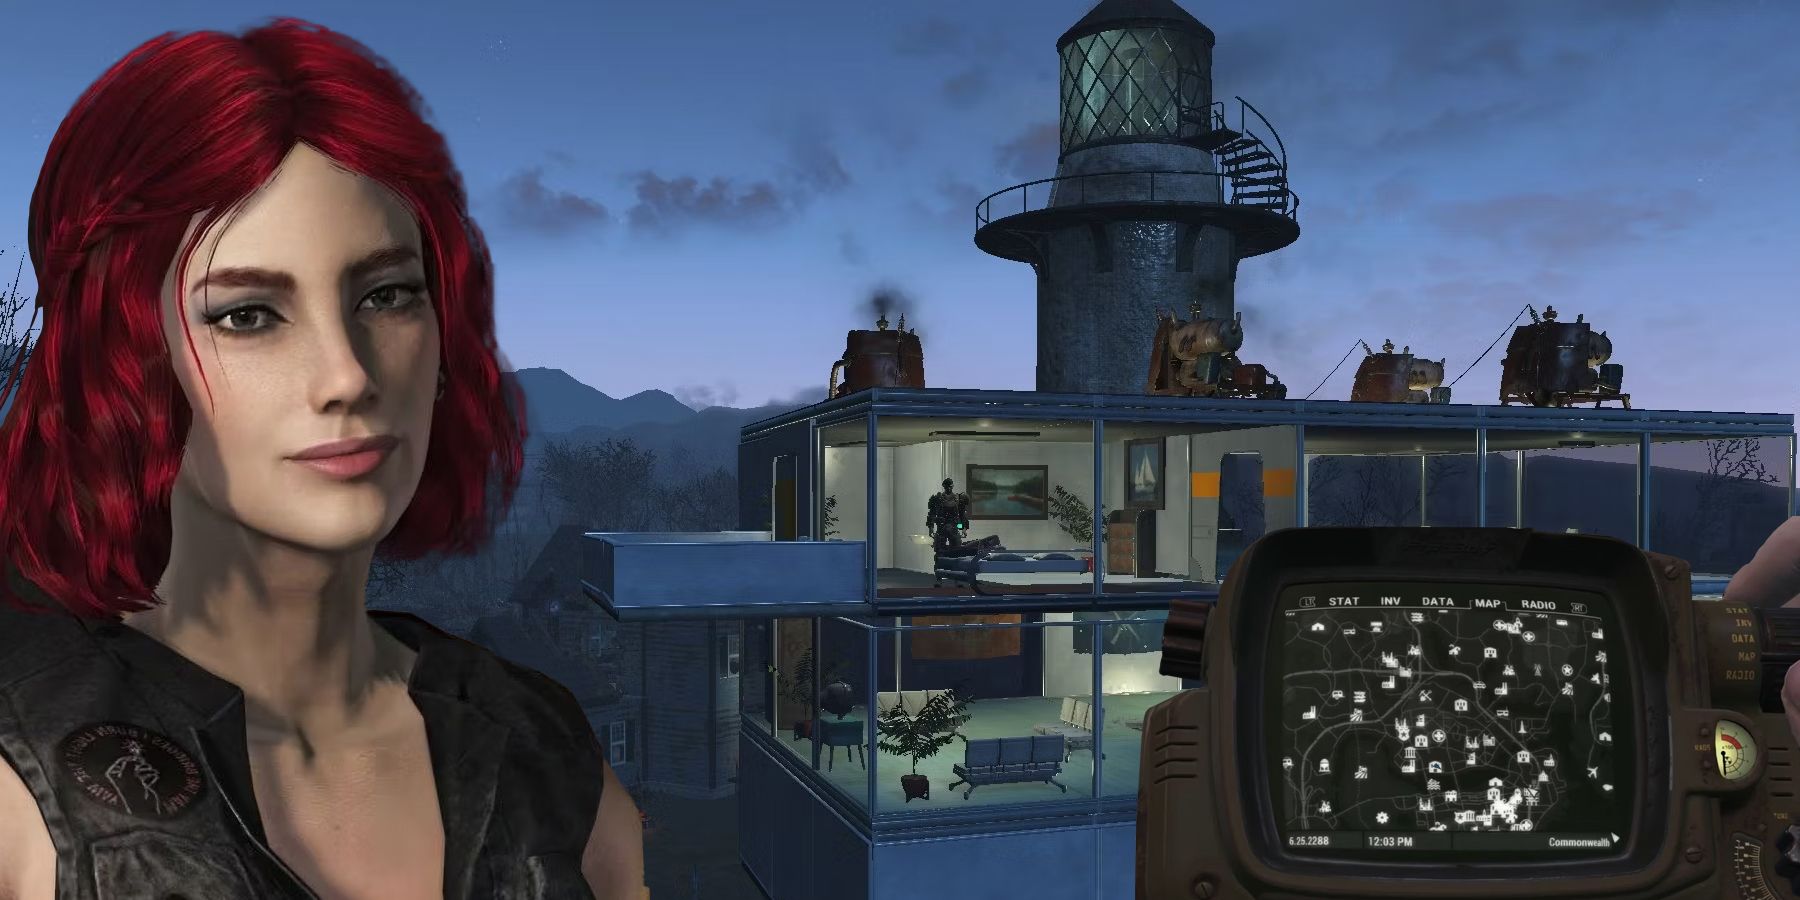 15 Fallout 3 Mods That Make The Game Even Better